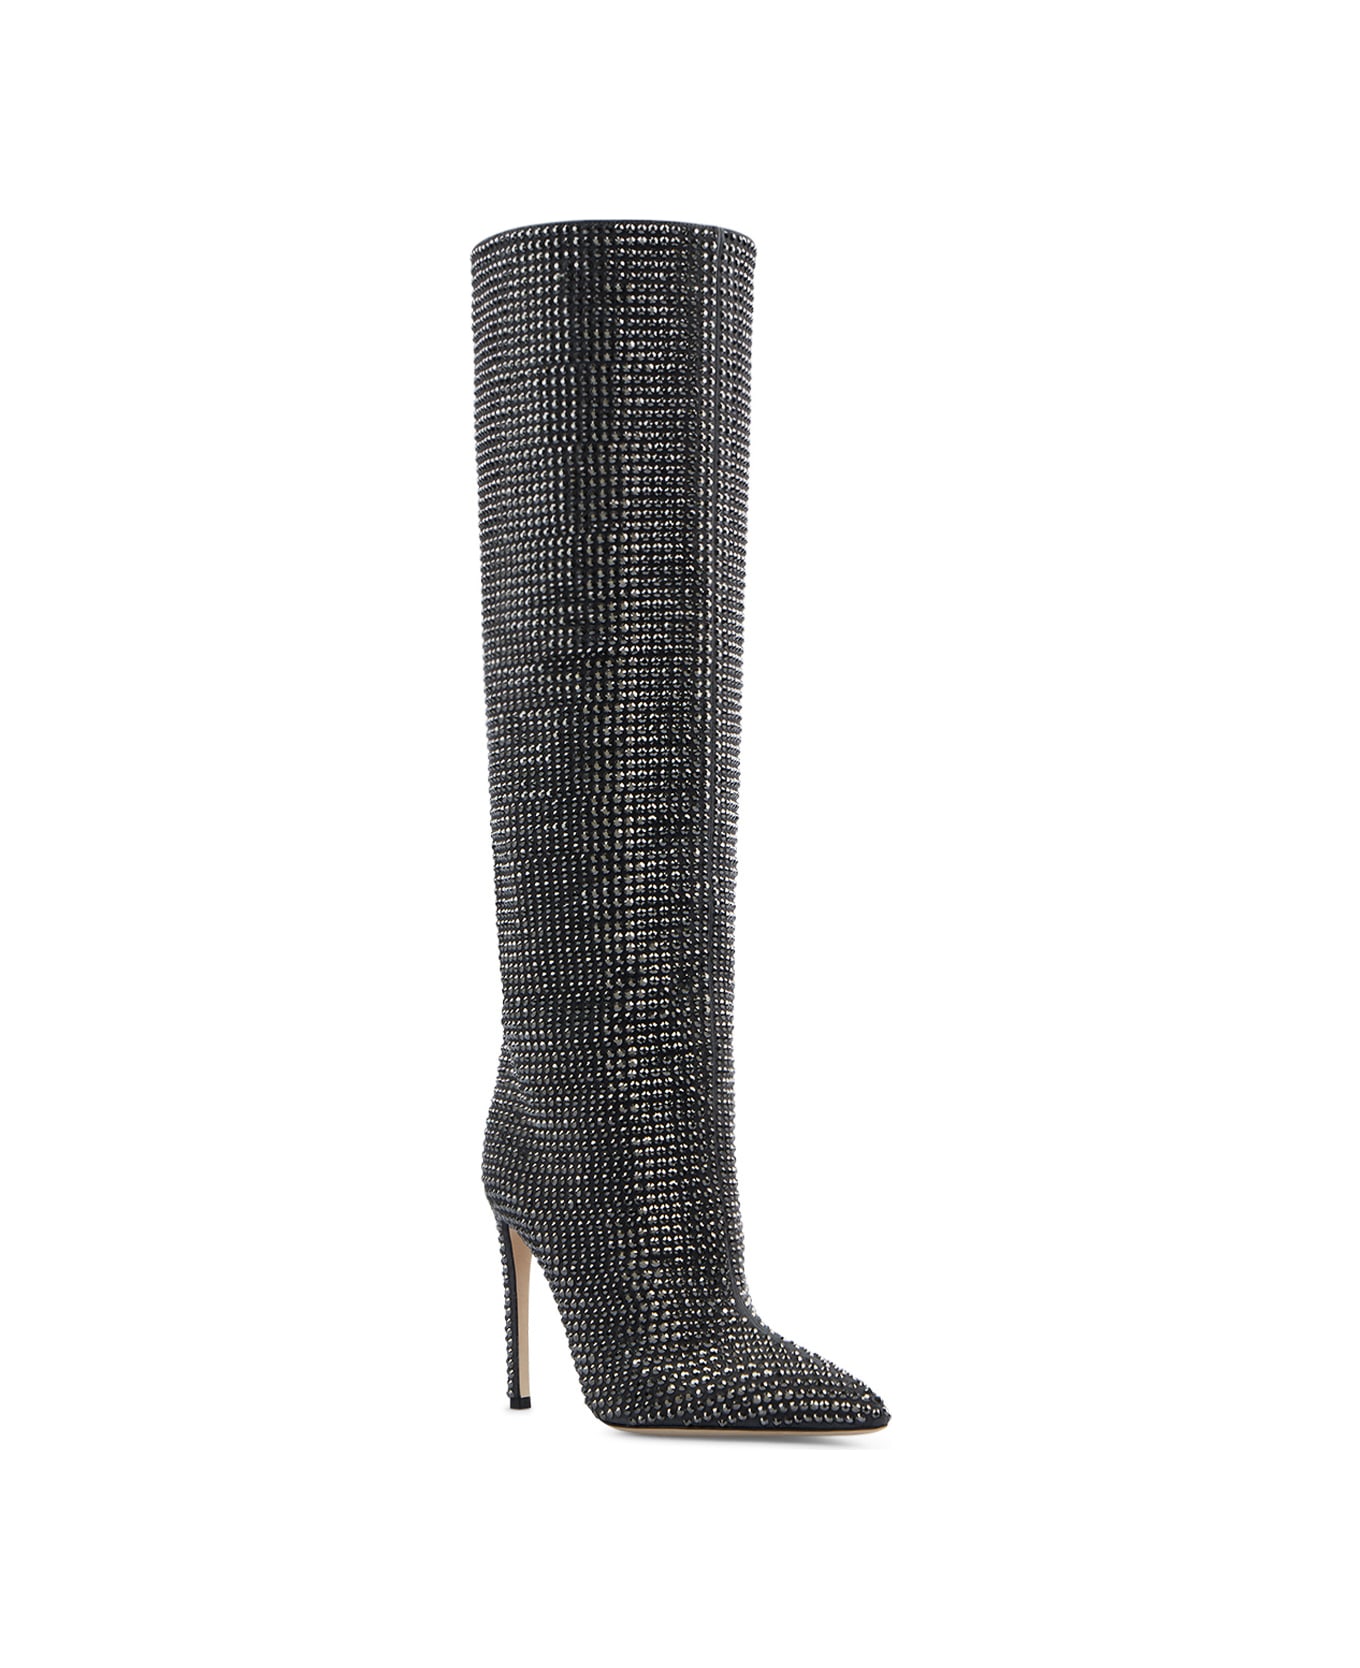 Paris Texas Anthracite Holly Boots - Grey